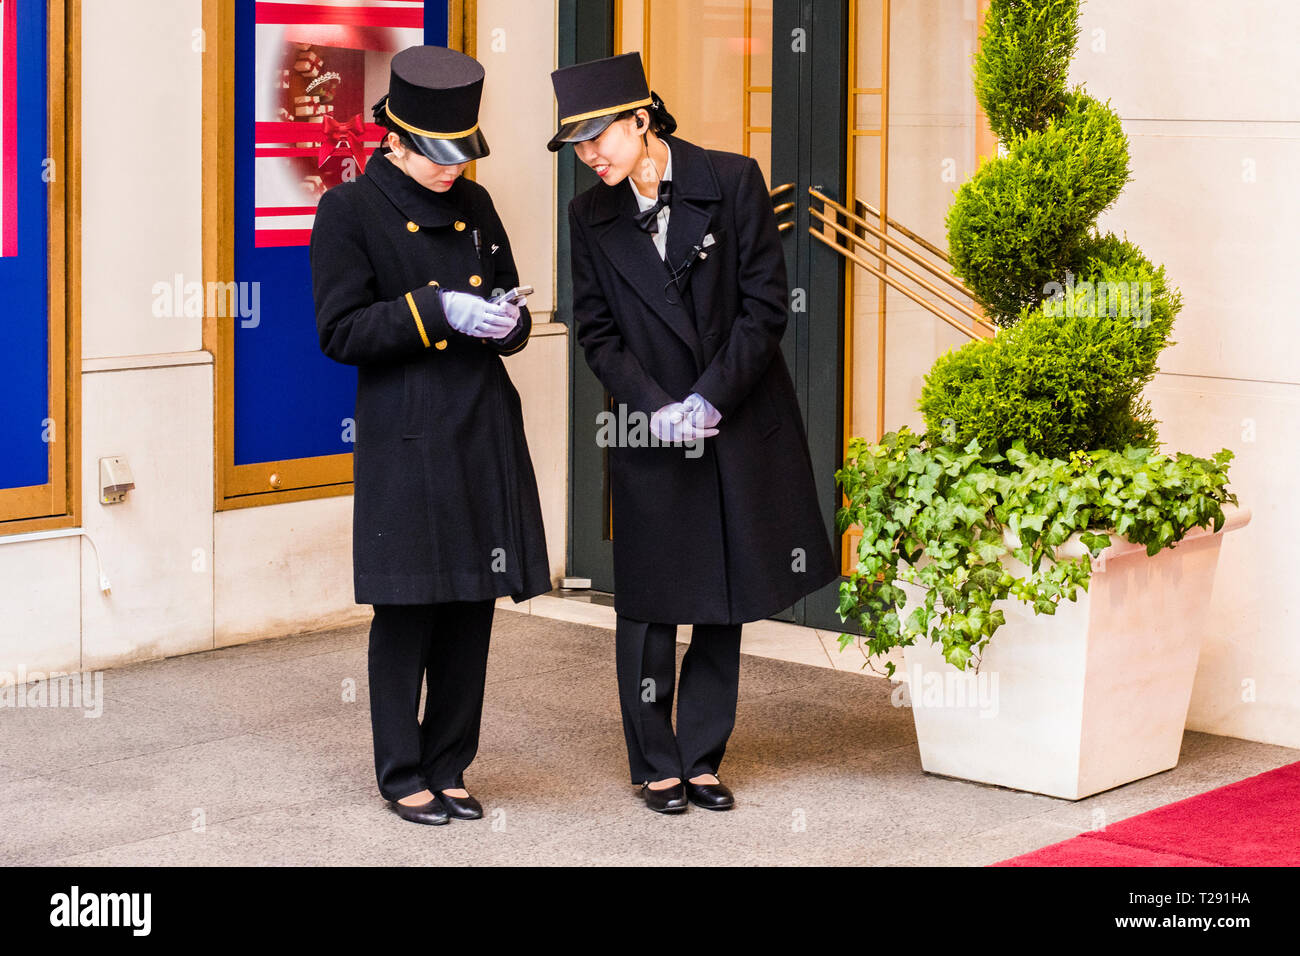 Two female hotel porters, standing outside hotel, looking at smartphone, Omotesando Area, Tokyo, Japan Stock Photo